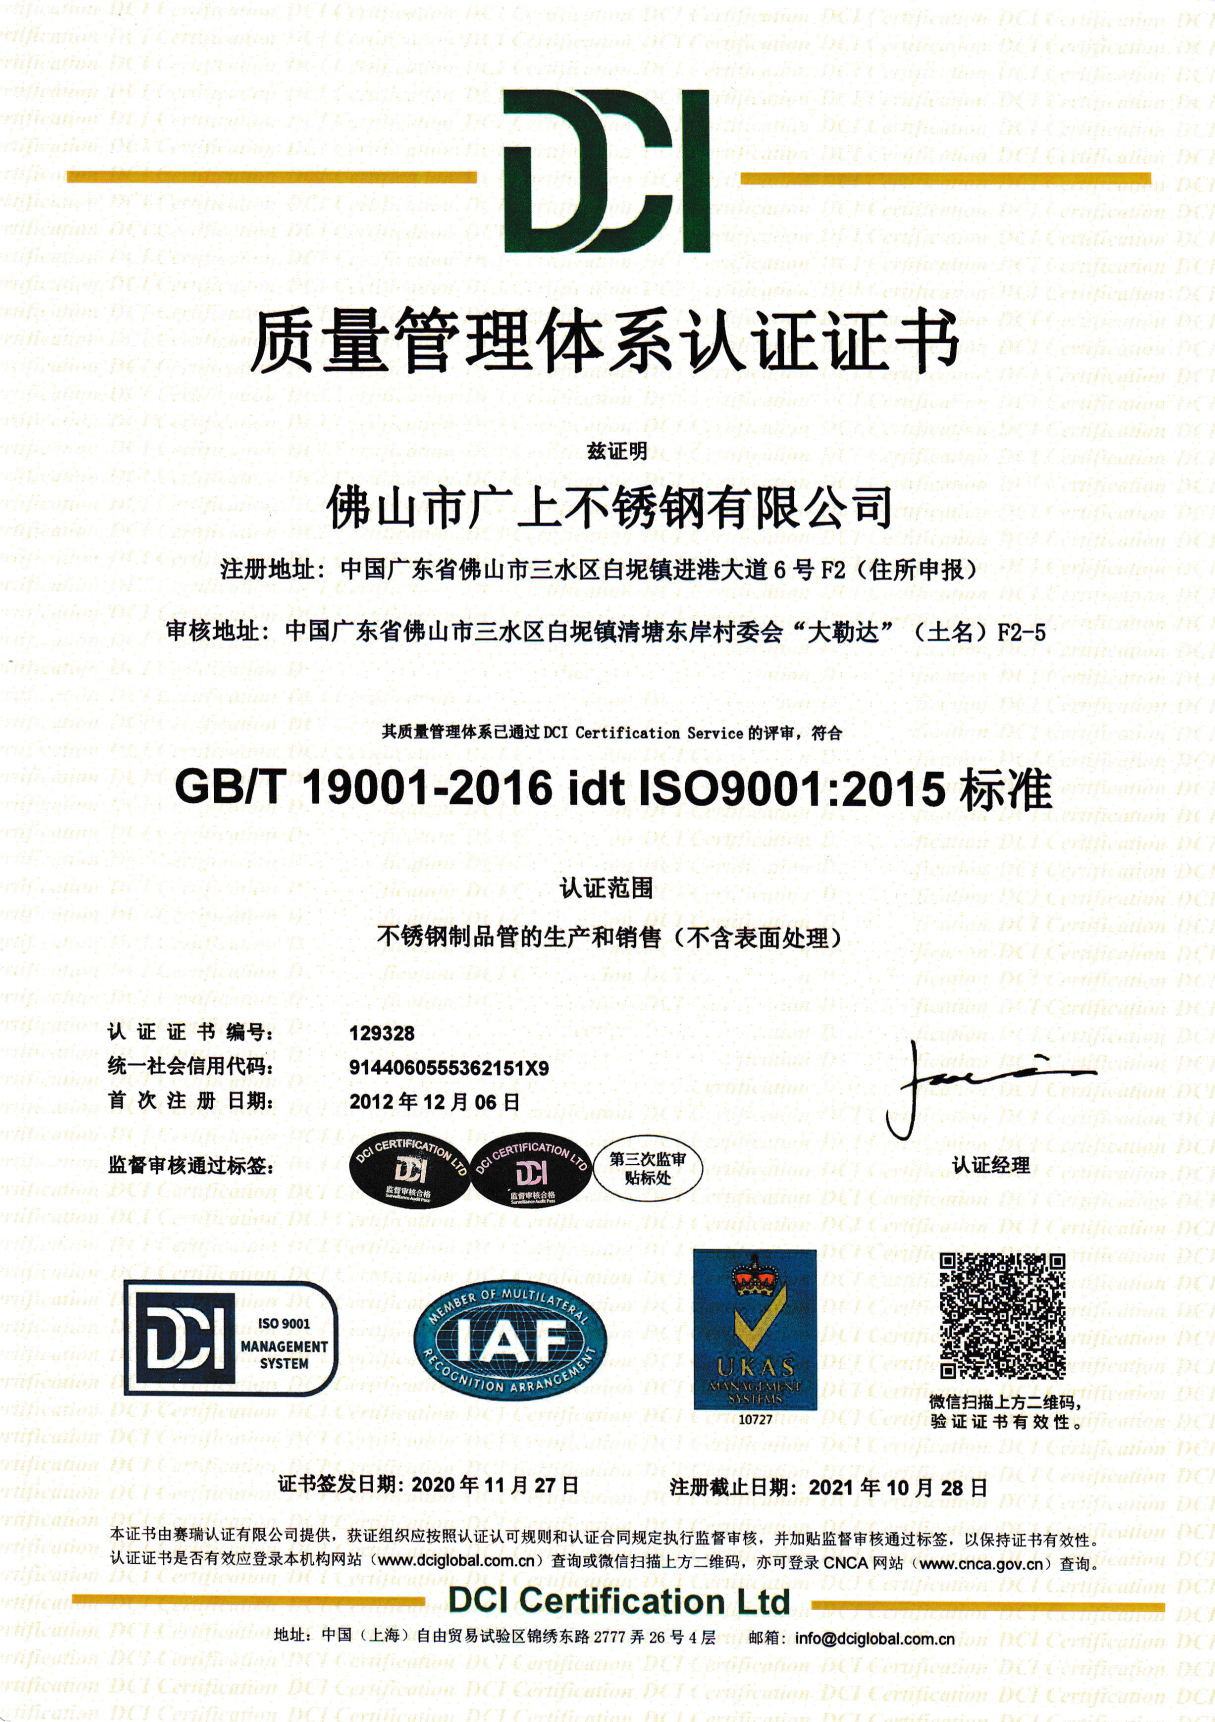 Quality Management System Certification, signed and issued by DCI Certification Service.